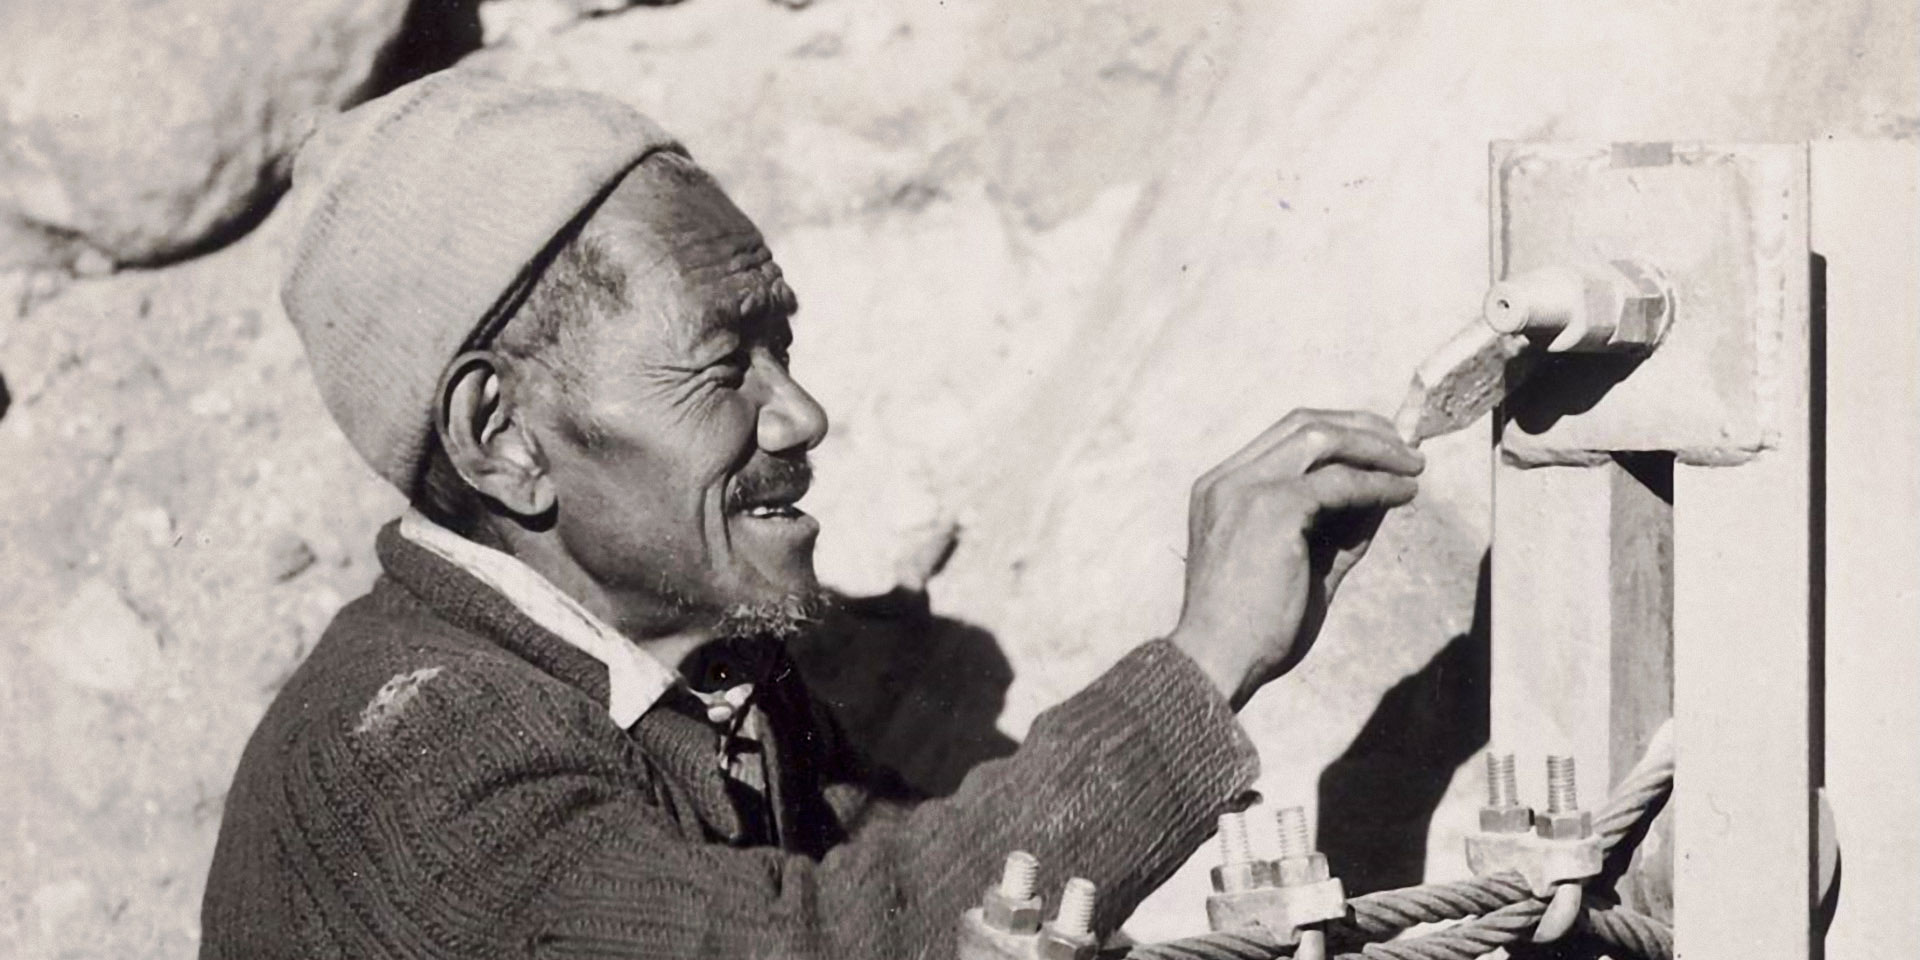 Ang Tsering Sherpa painting a bridge element with paint and brush.